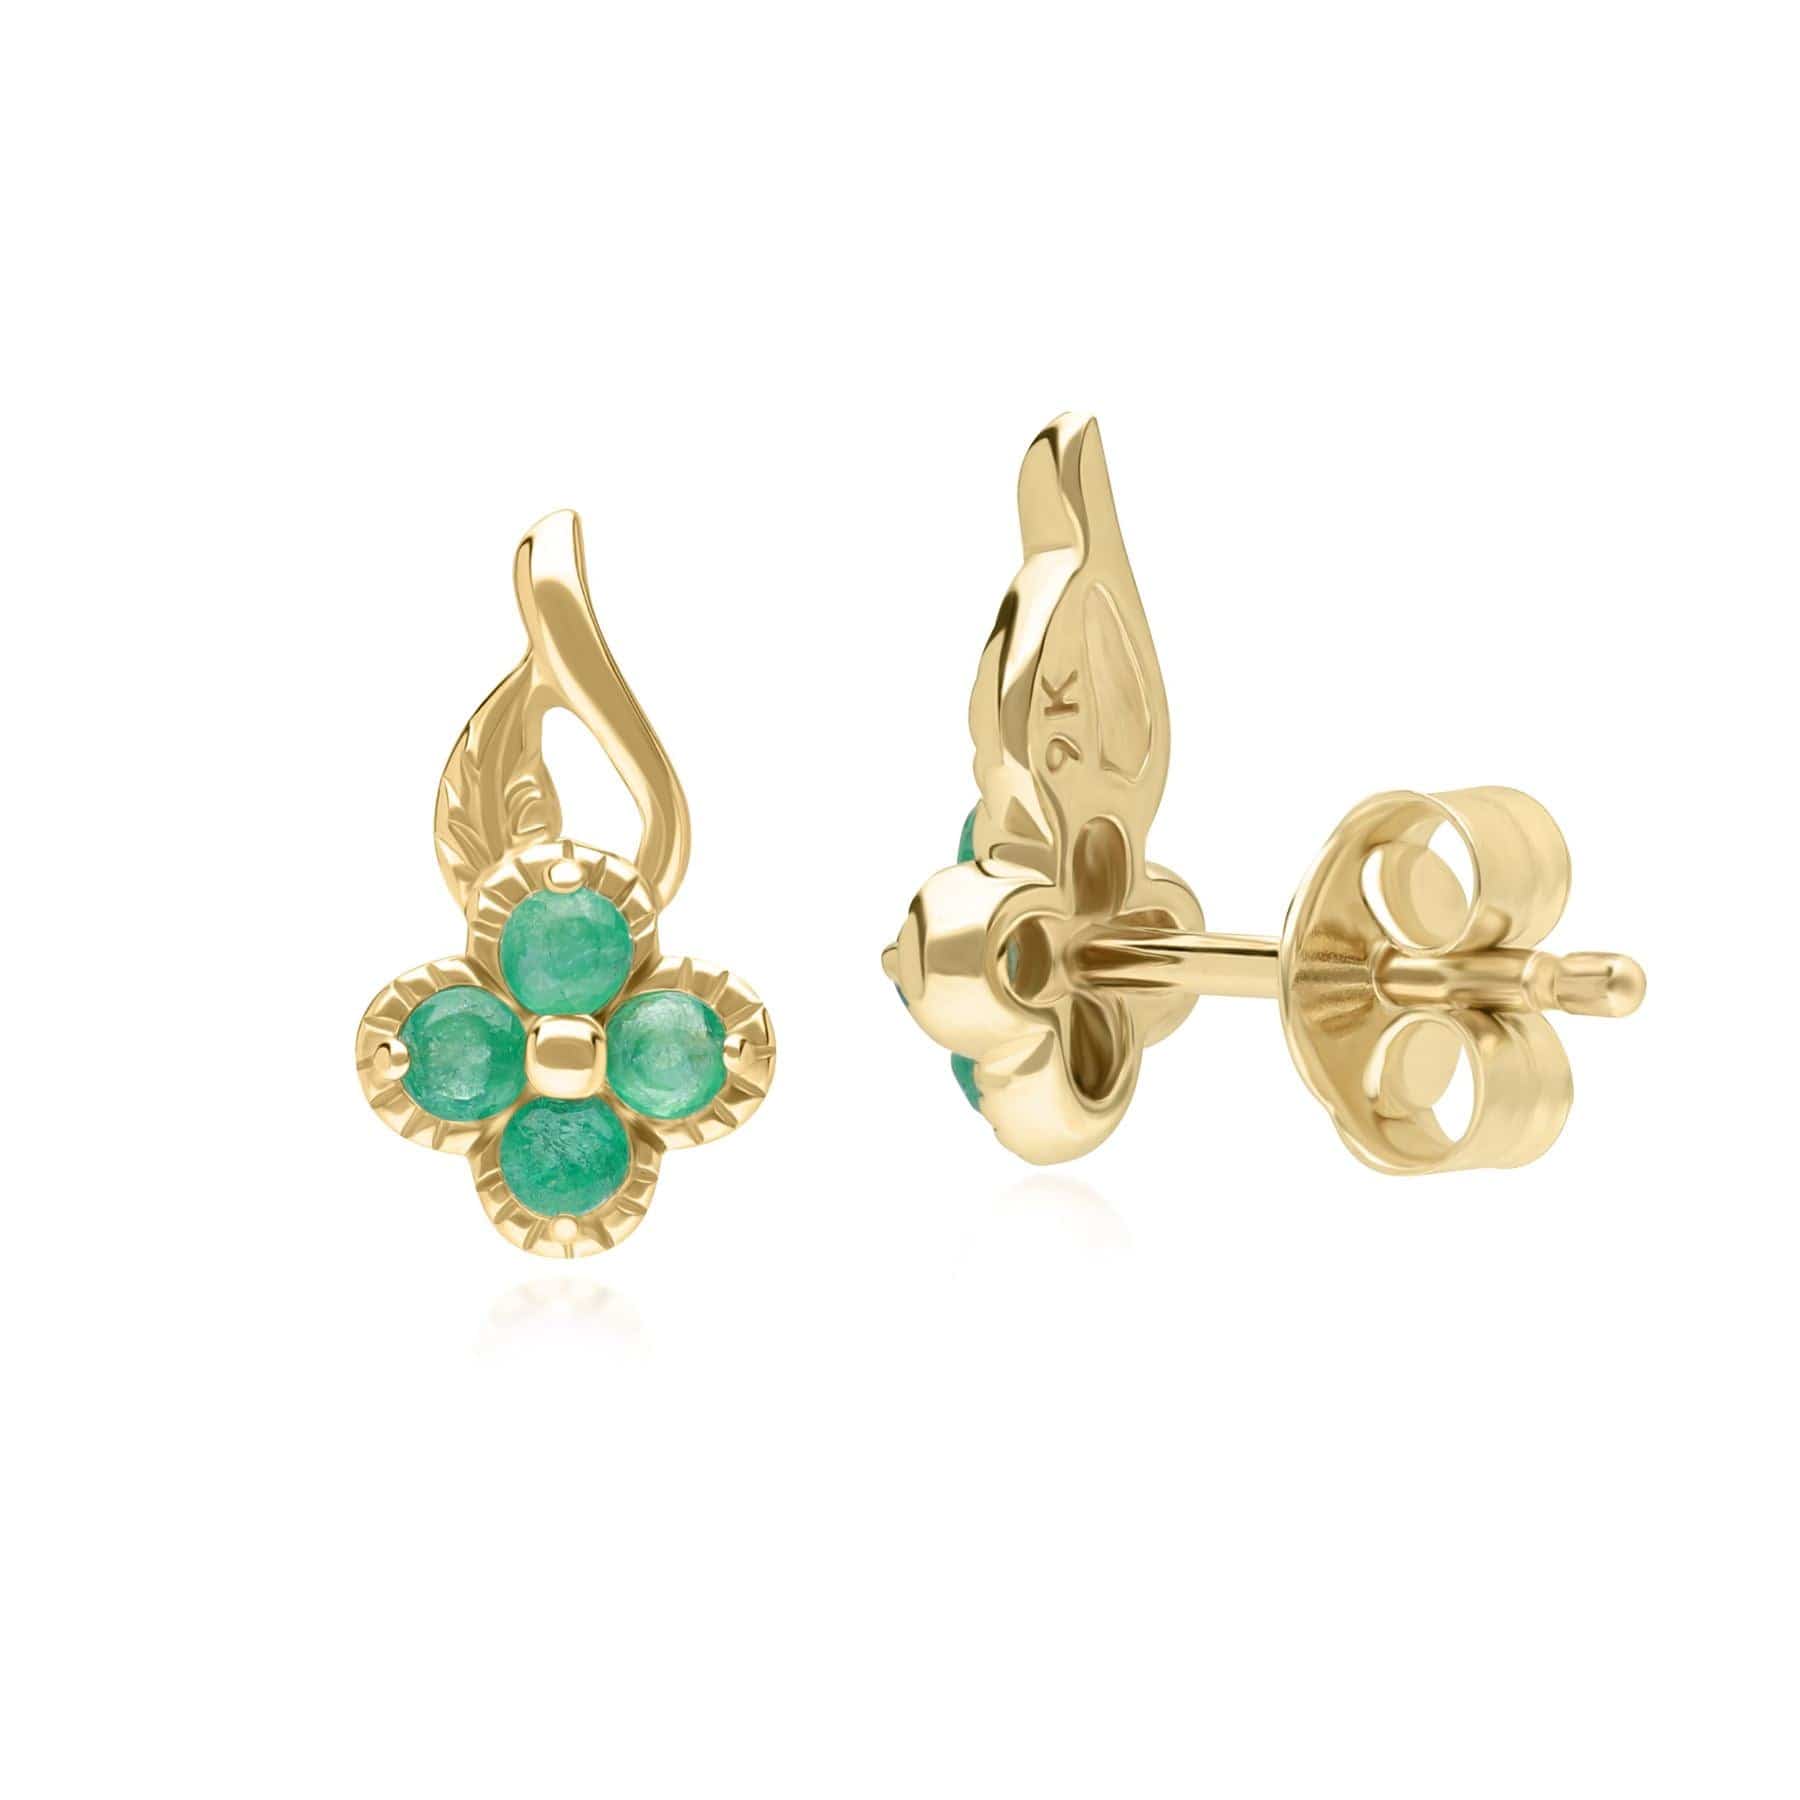 Floral Round Emerald Stud Earrings in 9ct Yellow Gold - Gemondo